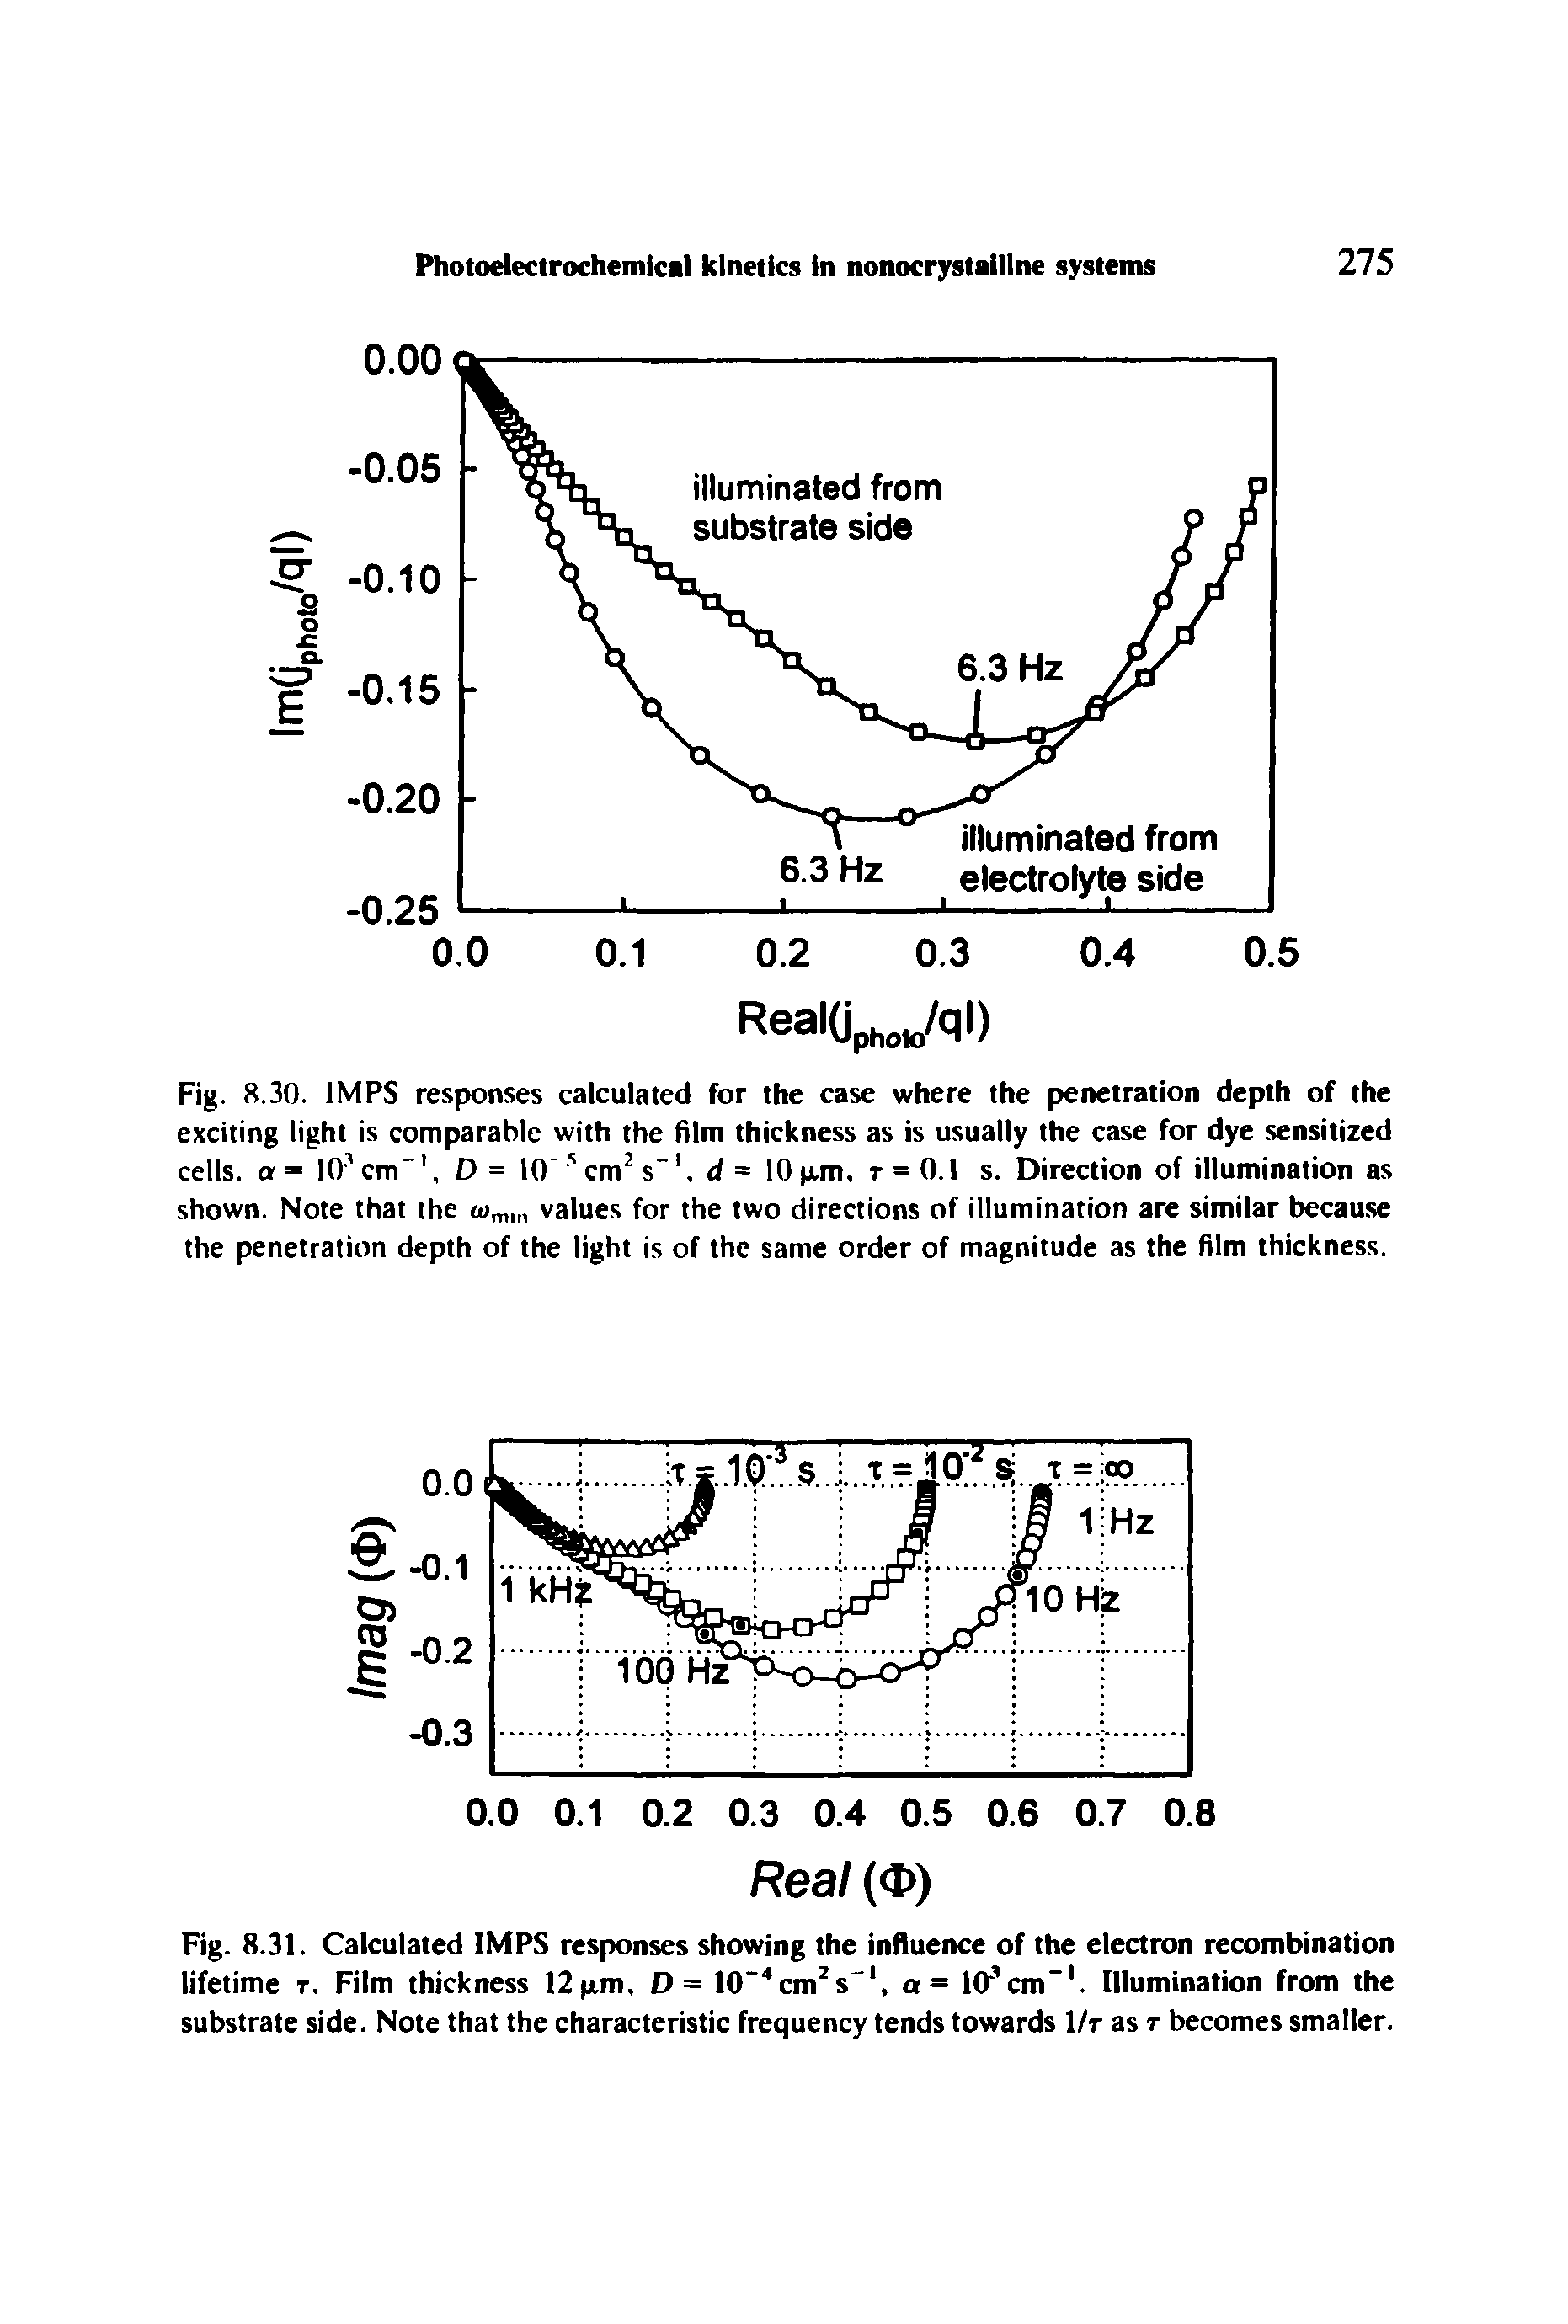 Fig. 8.31. Calculated IMPS responses showing the influence of the electron recombination lifetime r. Film thickness 12 xm, D= I0 4cm2s, a = lO cm-1. Illumination from the substrate side. Note that the characteristic frequency tends towards 1/r as r becomes smaller.